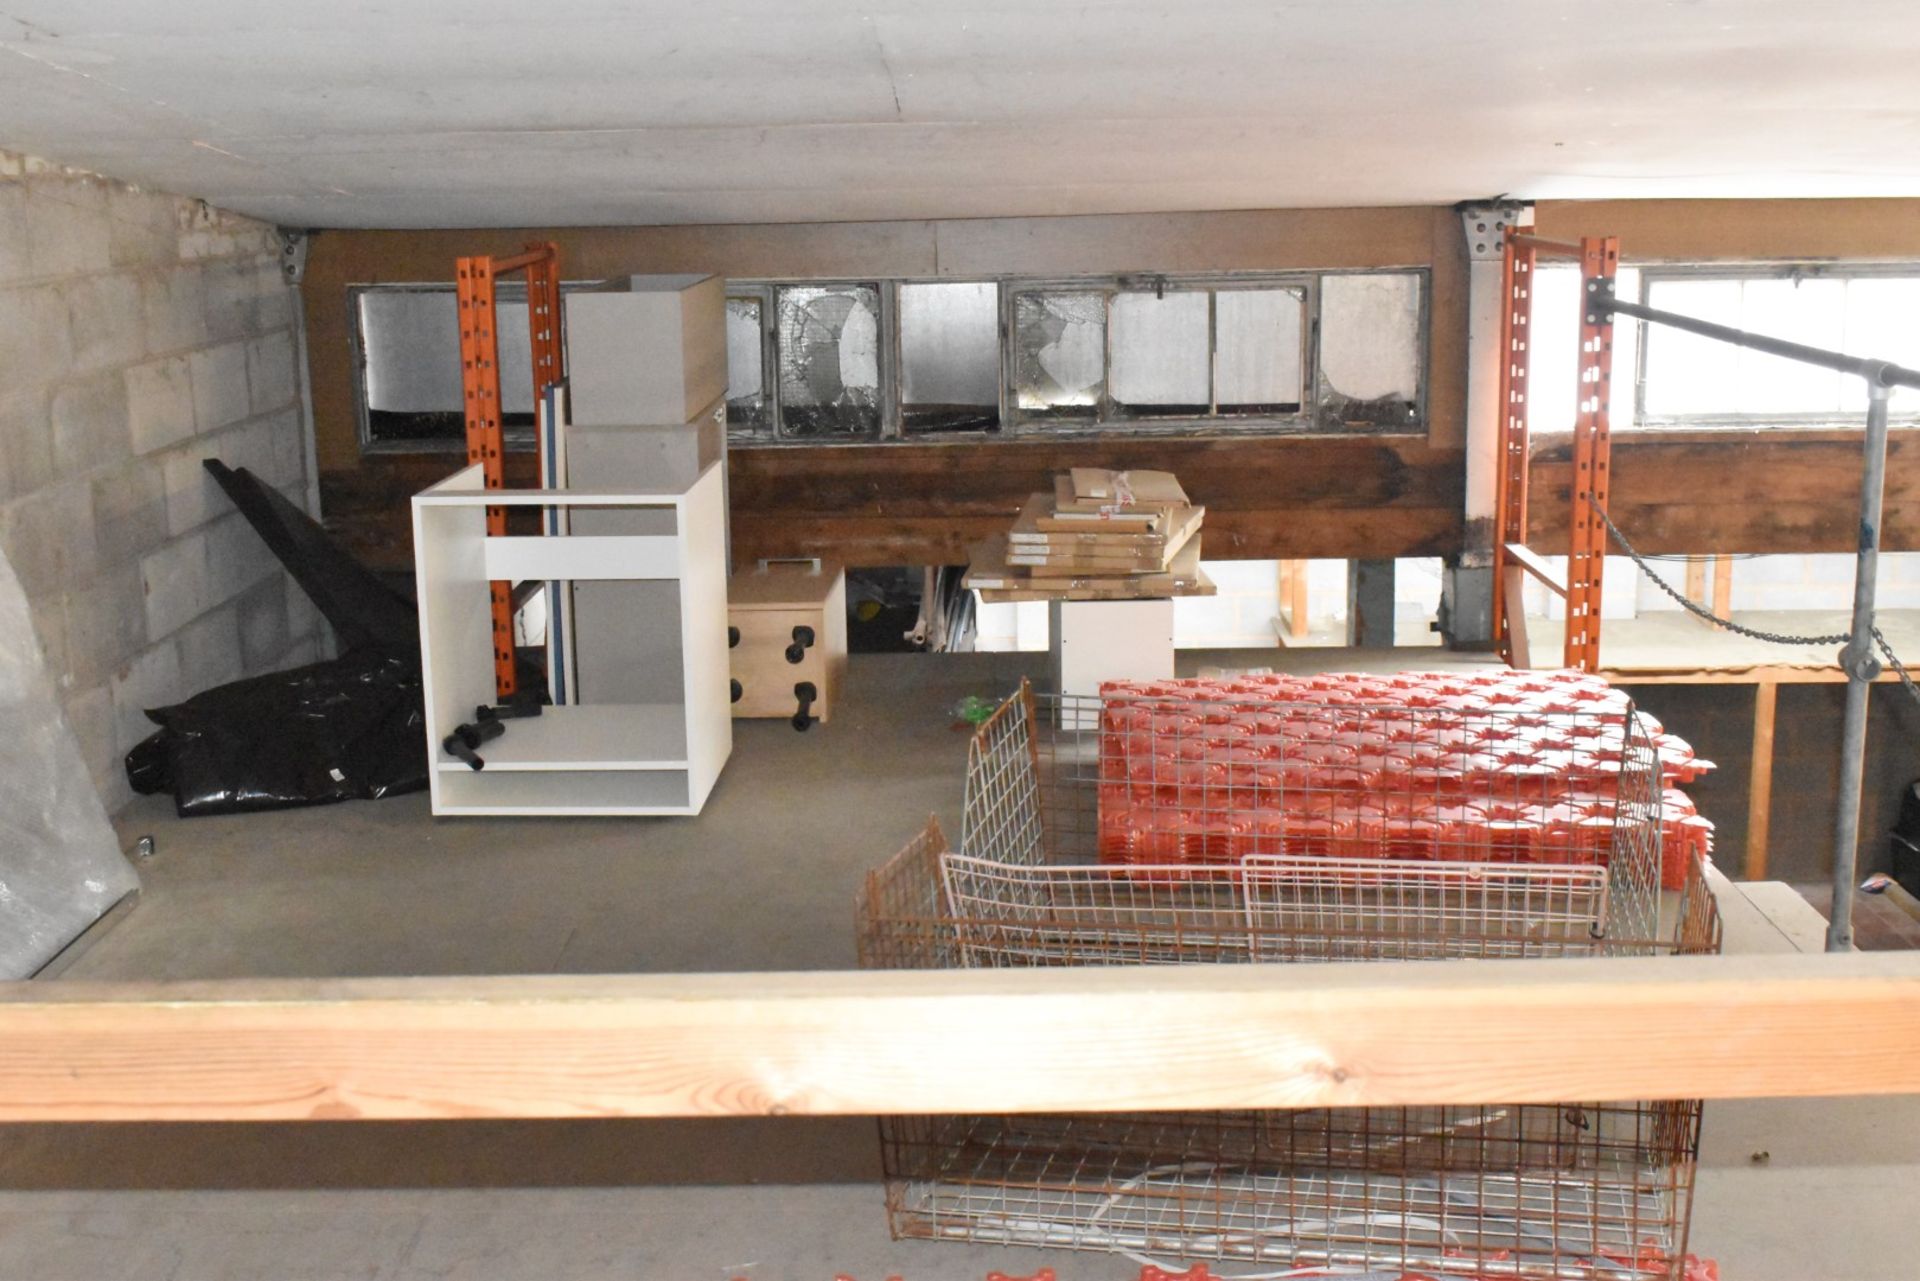 1 x Mezzanine Floor Construction of Steel Racking and Timber - Includes Staircase - Size: W11m x D3m - Image 18 of 18